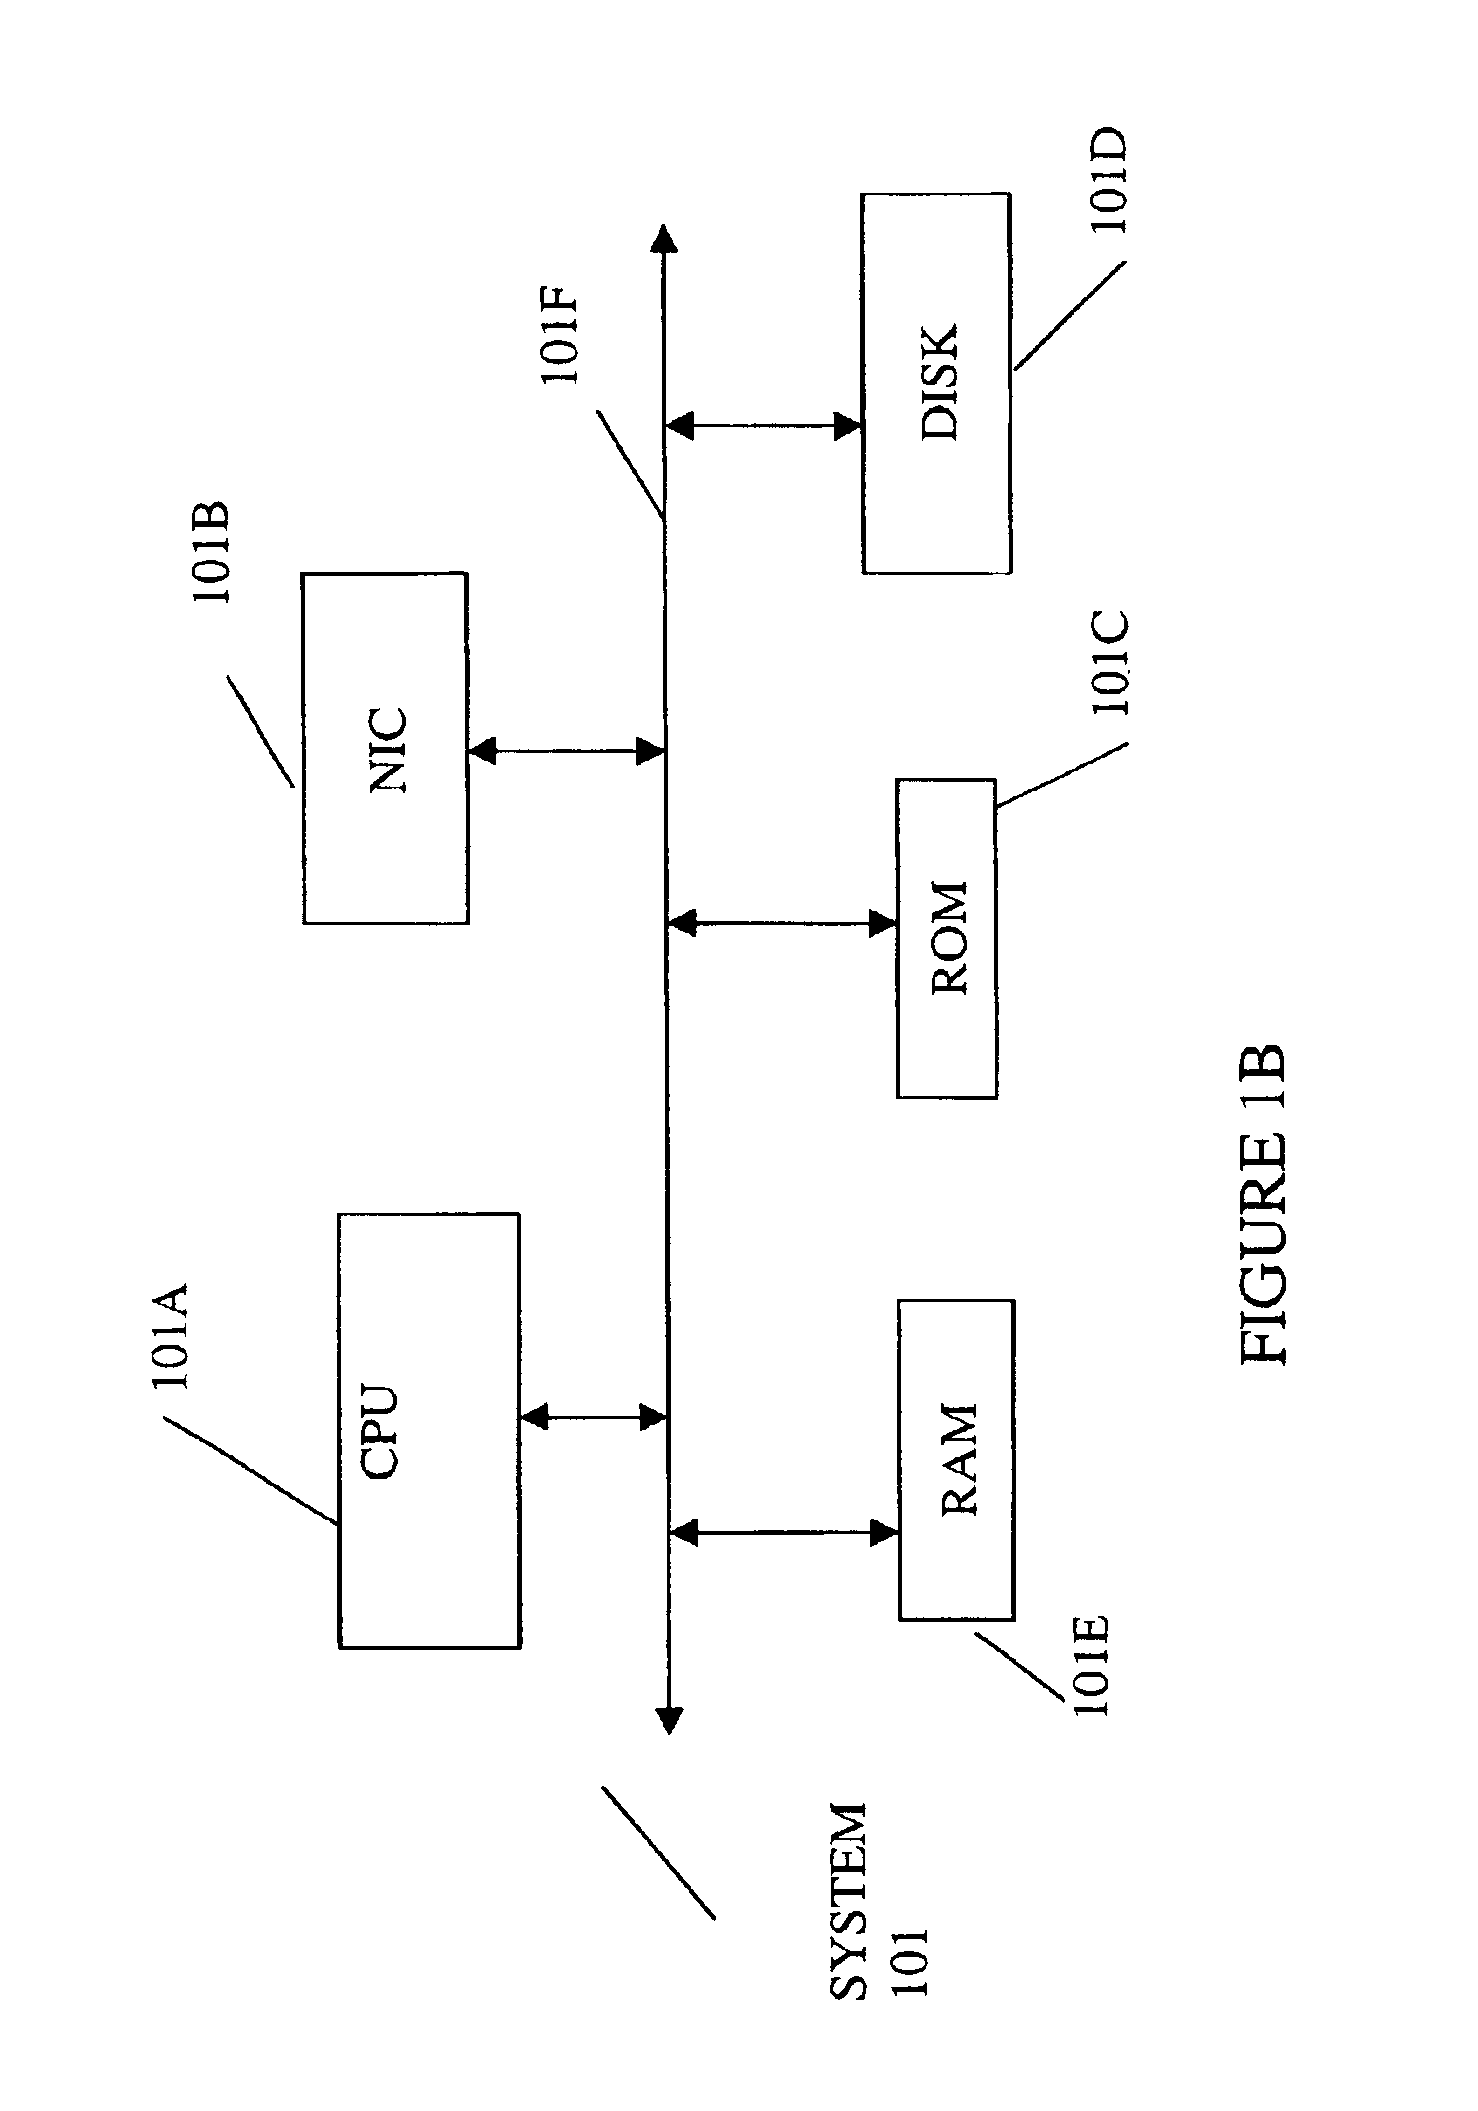 Method and system for reducing congestion in computer networks